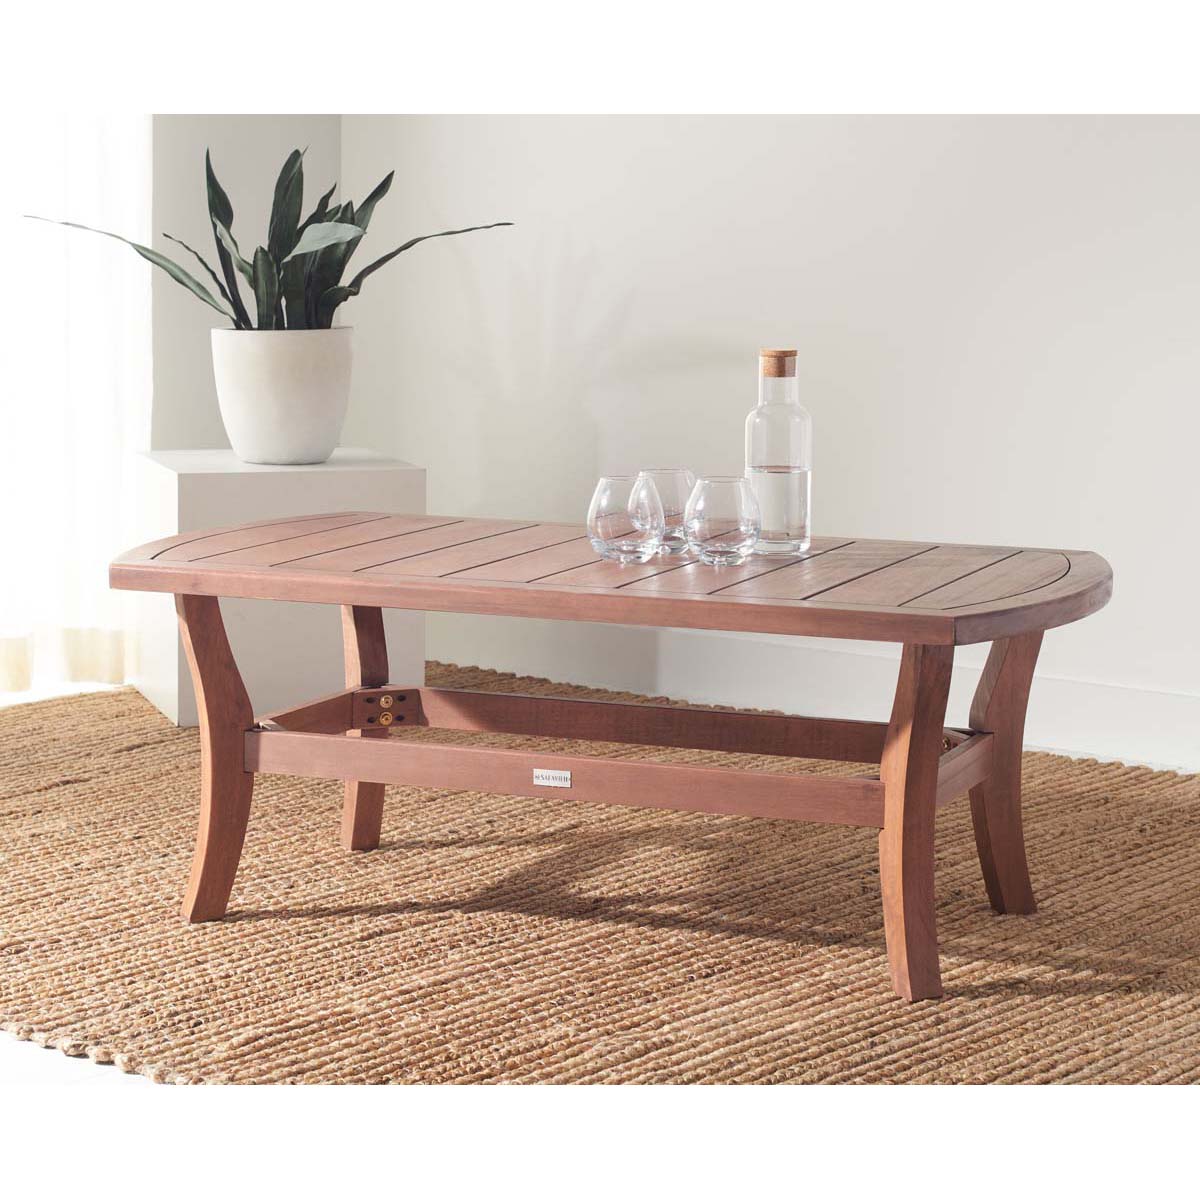 Safavieh Couture Payden Outdoor Coffee Table , CPT1024 - Natural / Beige